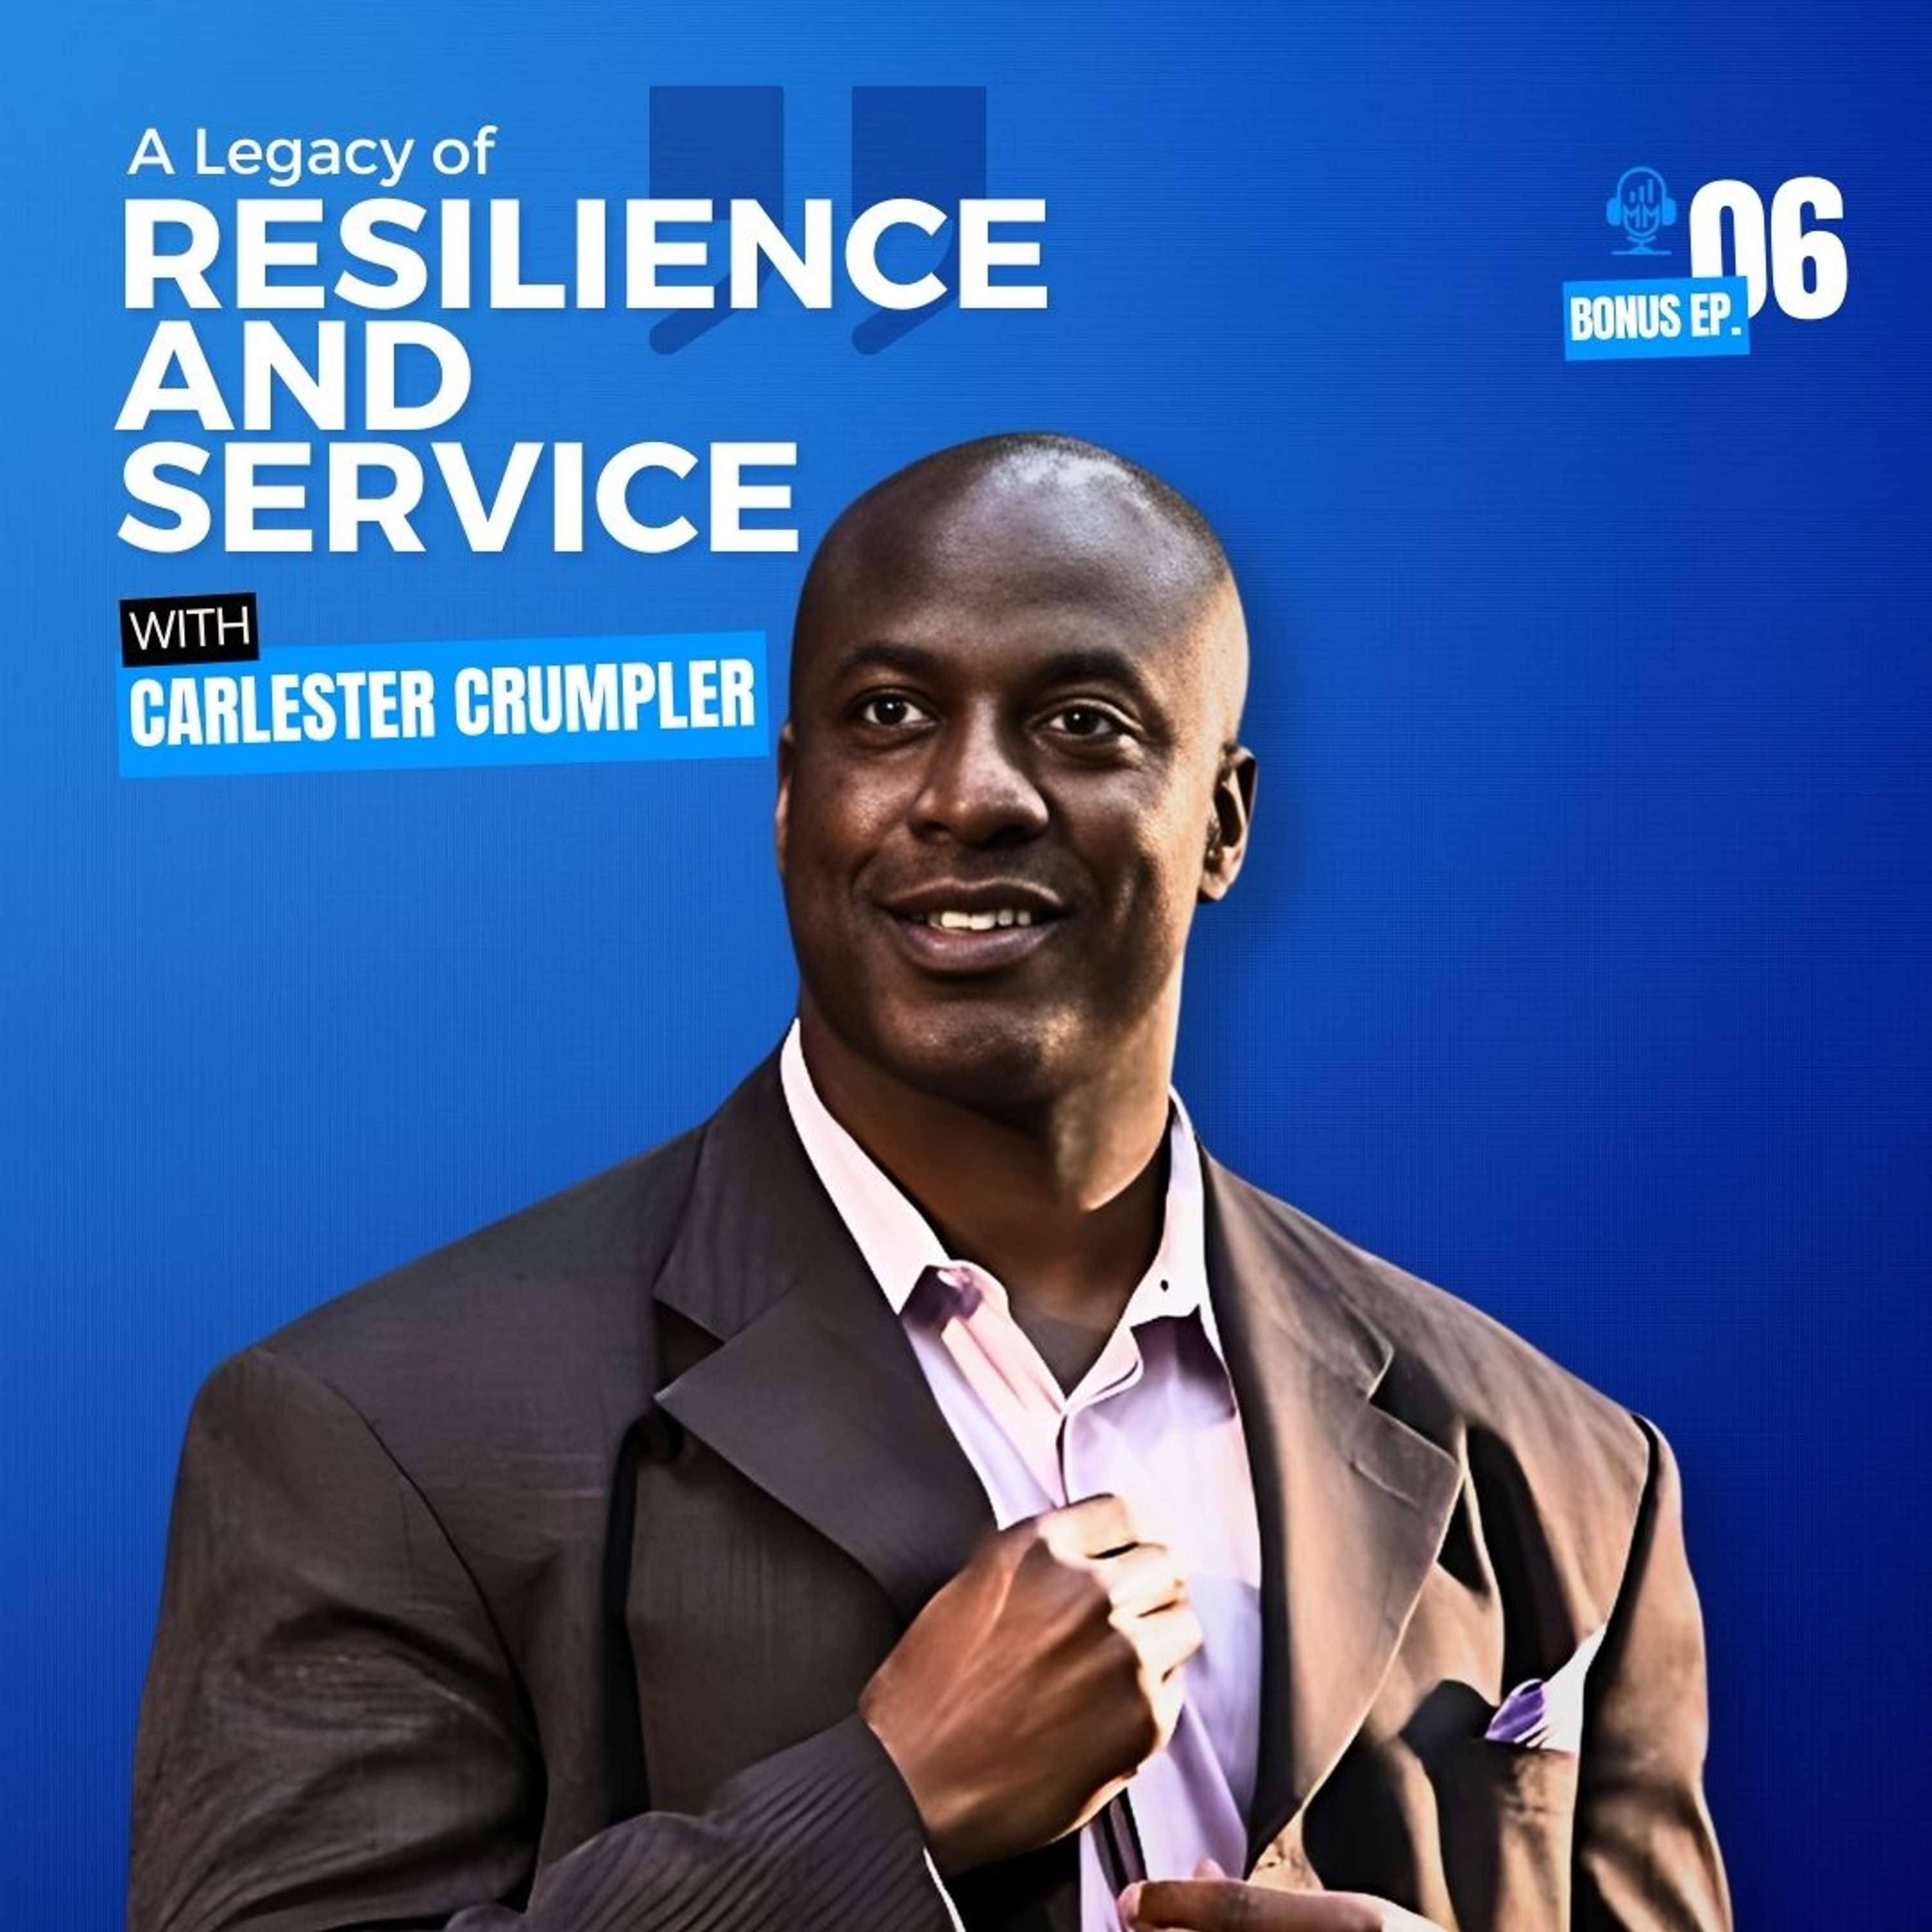 Bonus Episode 6 | Carlester Crumpler: A Legacy of Resilience and Service - Mick Unplugged